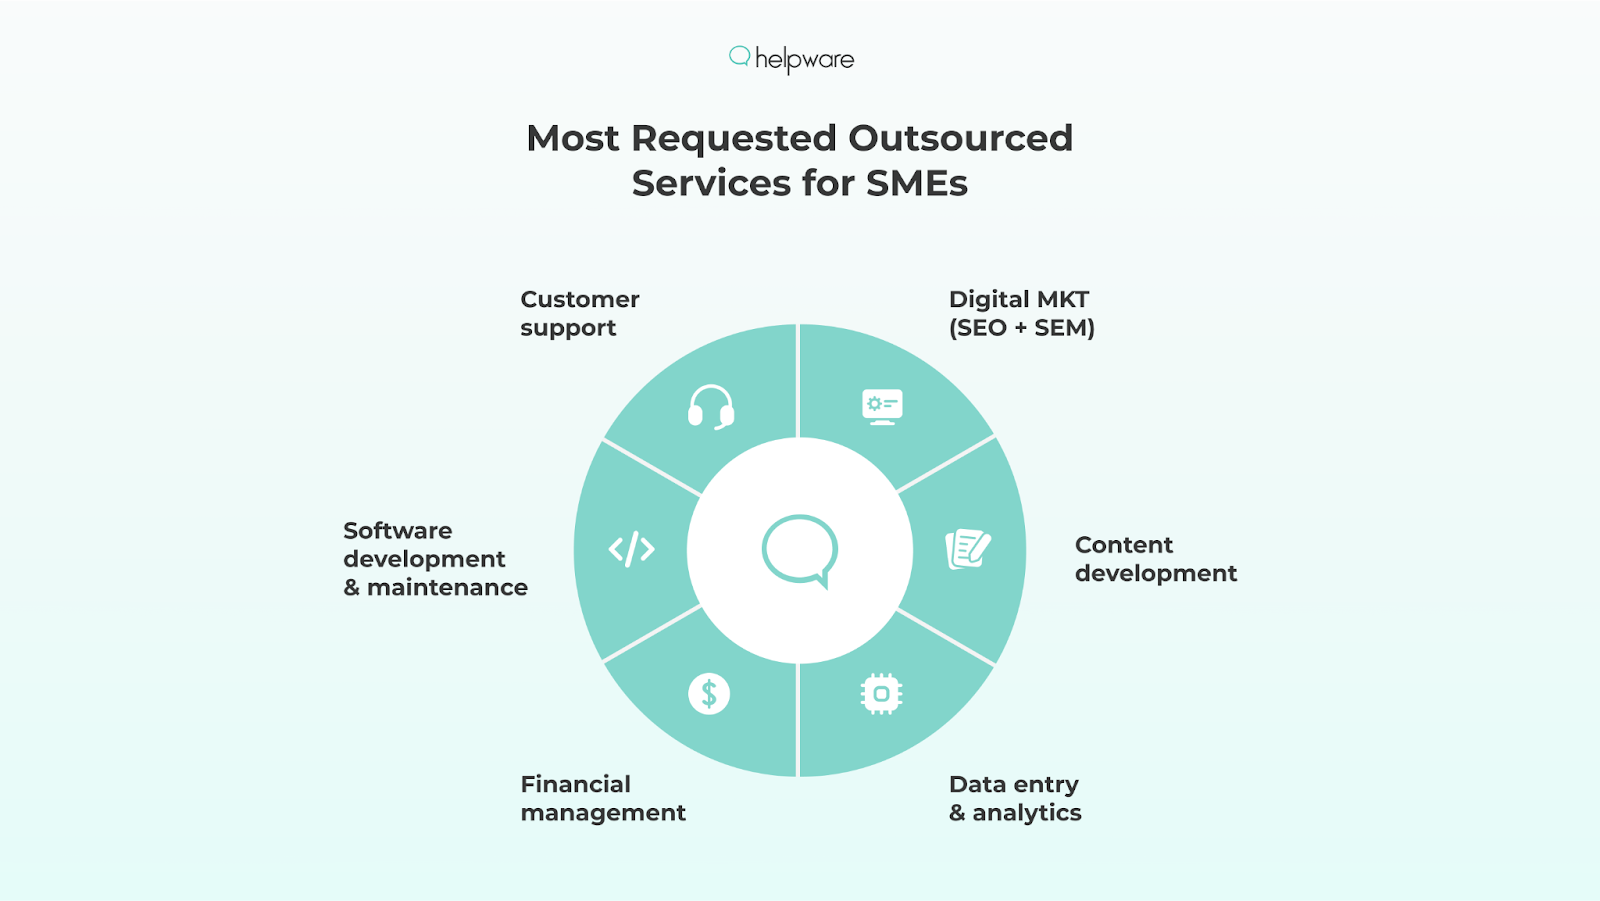 Most Requested Outsourced Services for SMEs